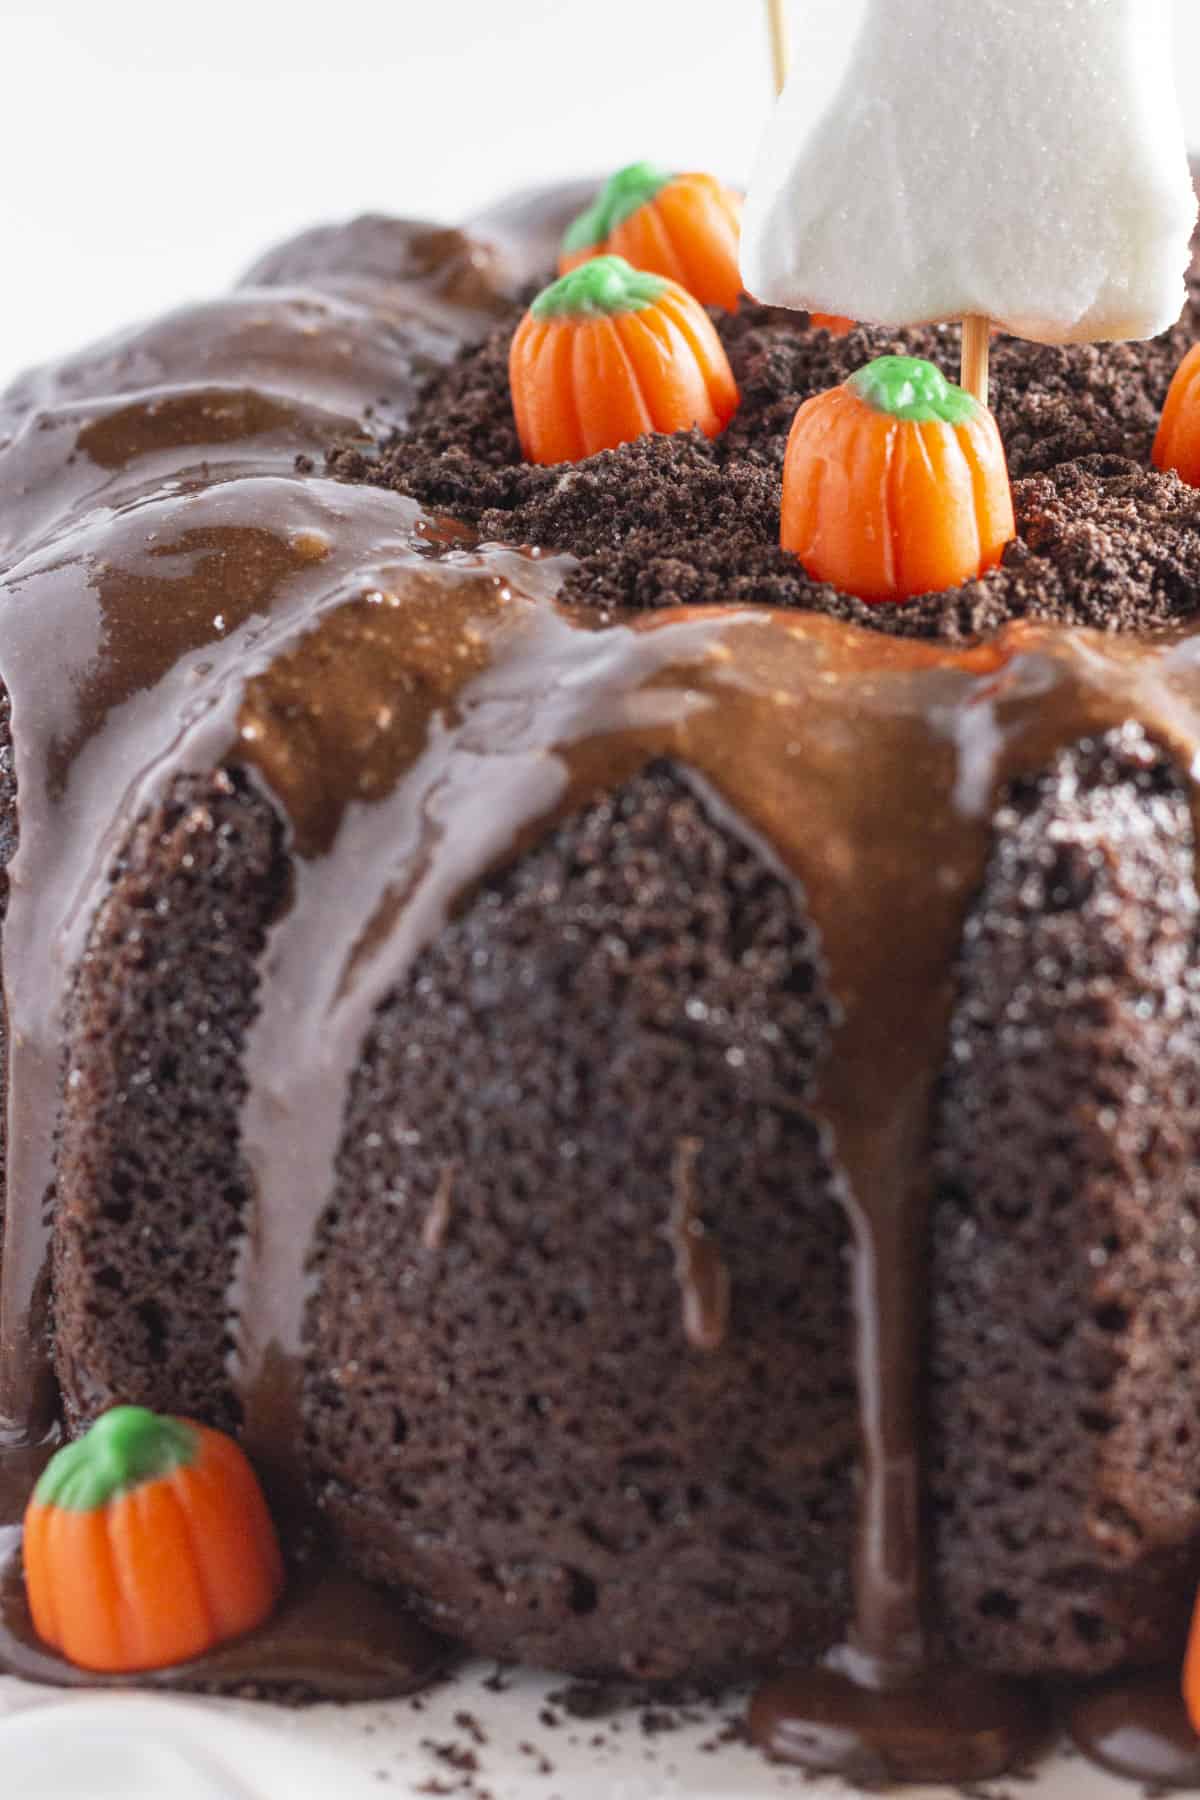 An up close photo of the ingredients needed to decorate a Halloween Cake.